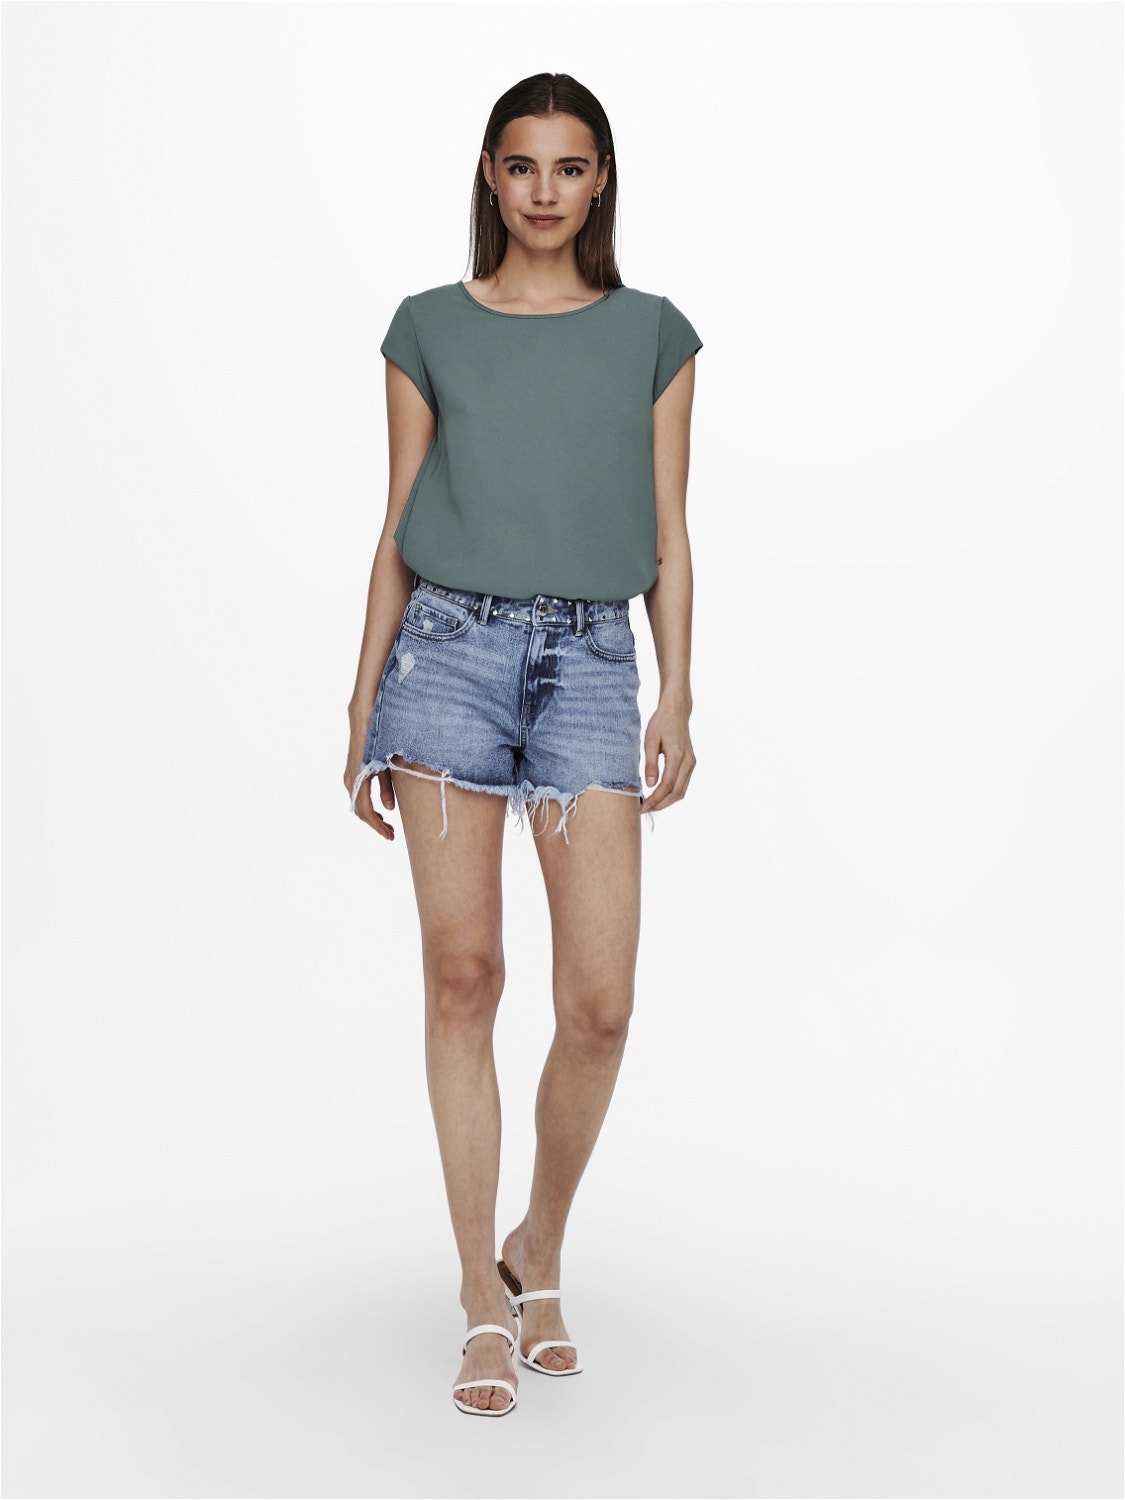 ONLY Loose Short Sleeved Top -Balsam Green - 15142784